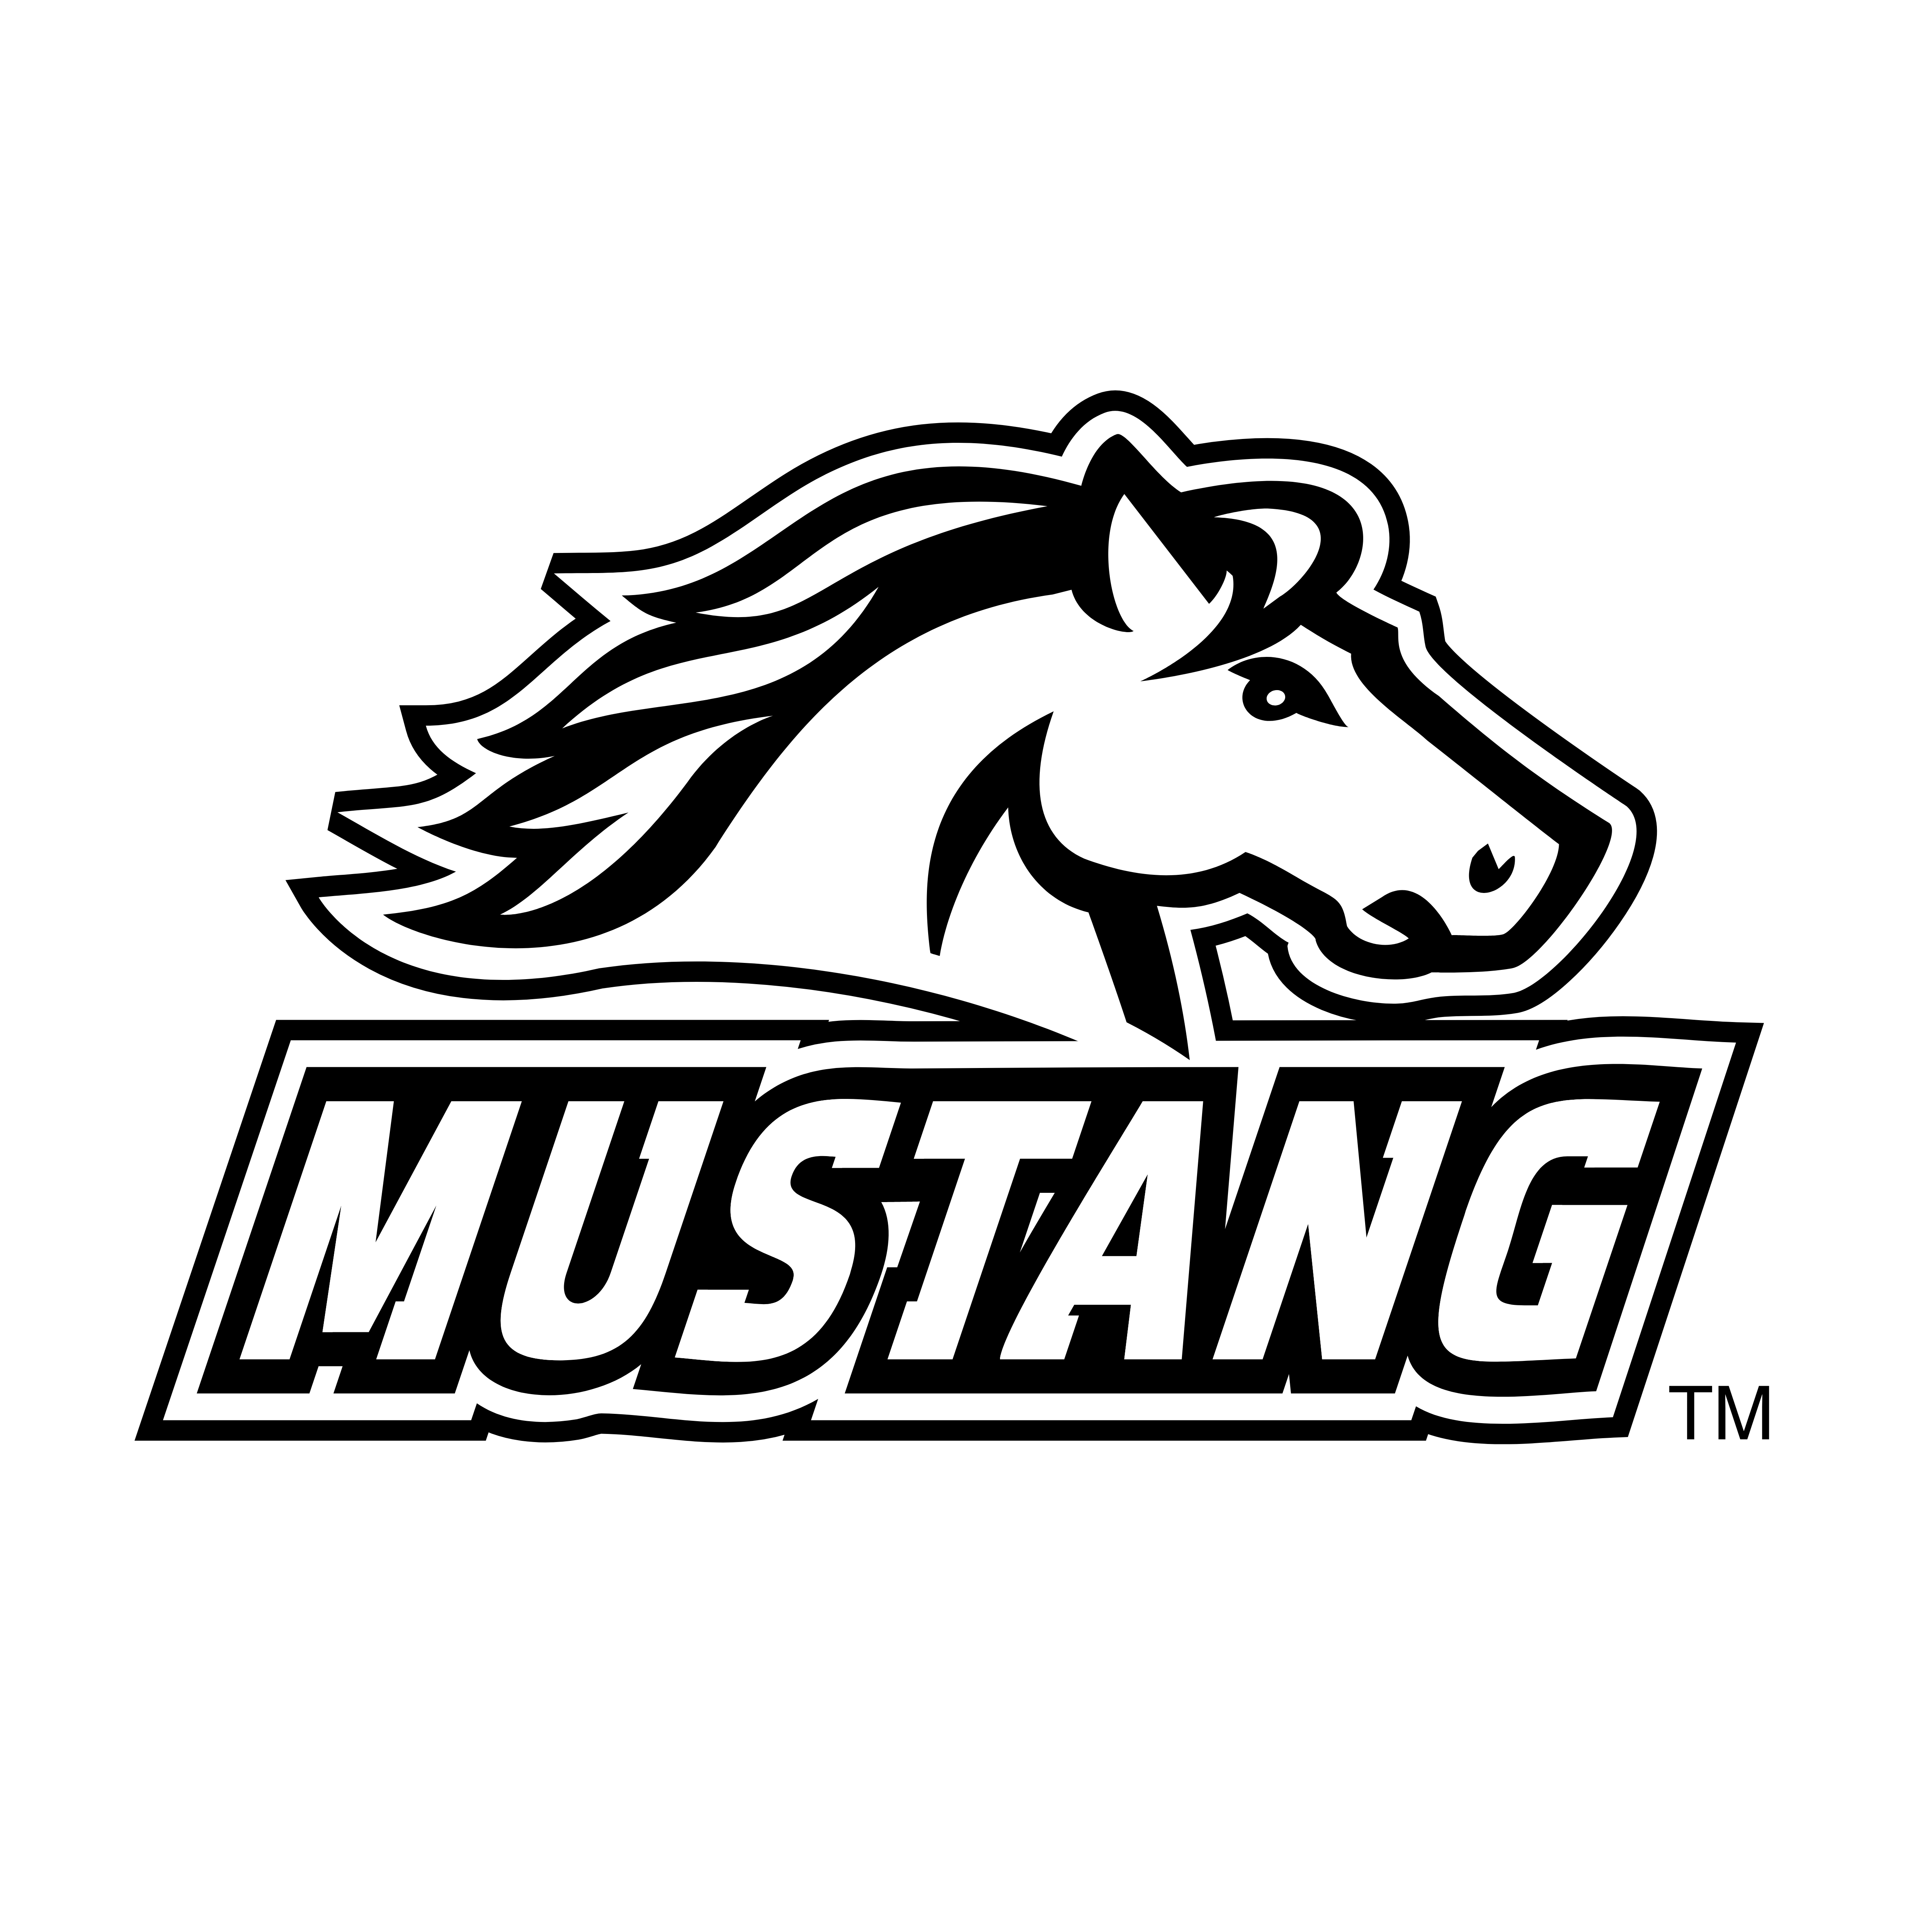 Mustang Logo Pictures - Ford Mustang Logo Wallpapers Hd Wallpaper ...